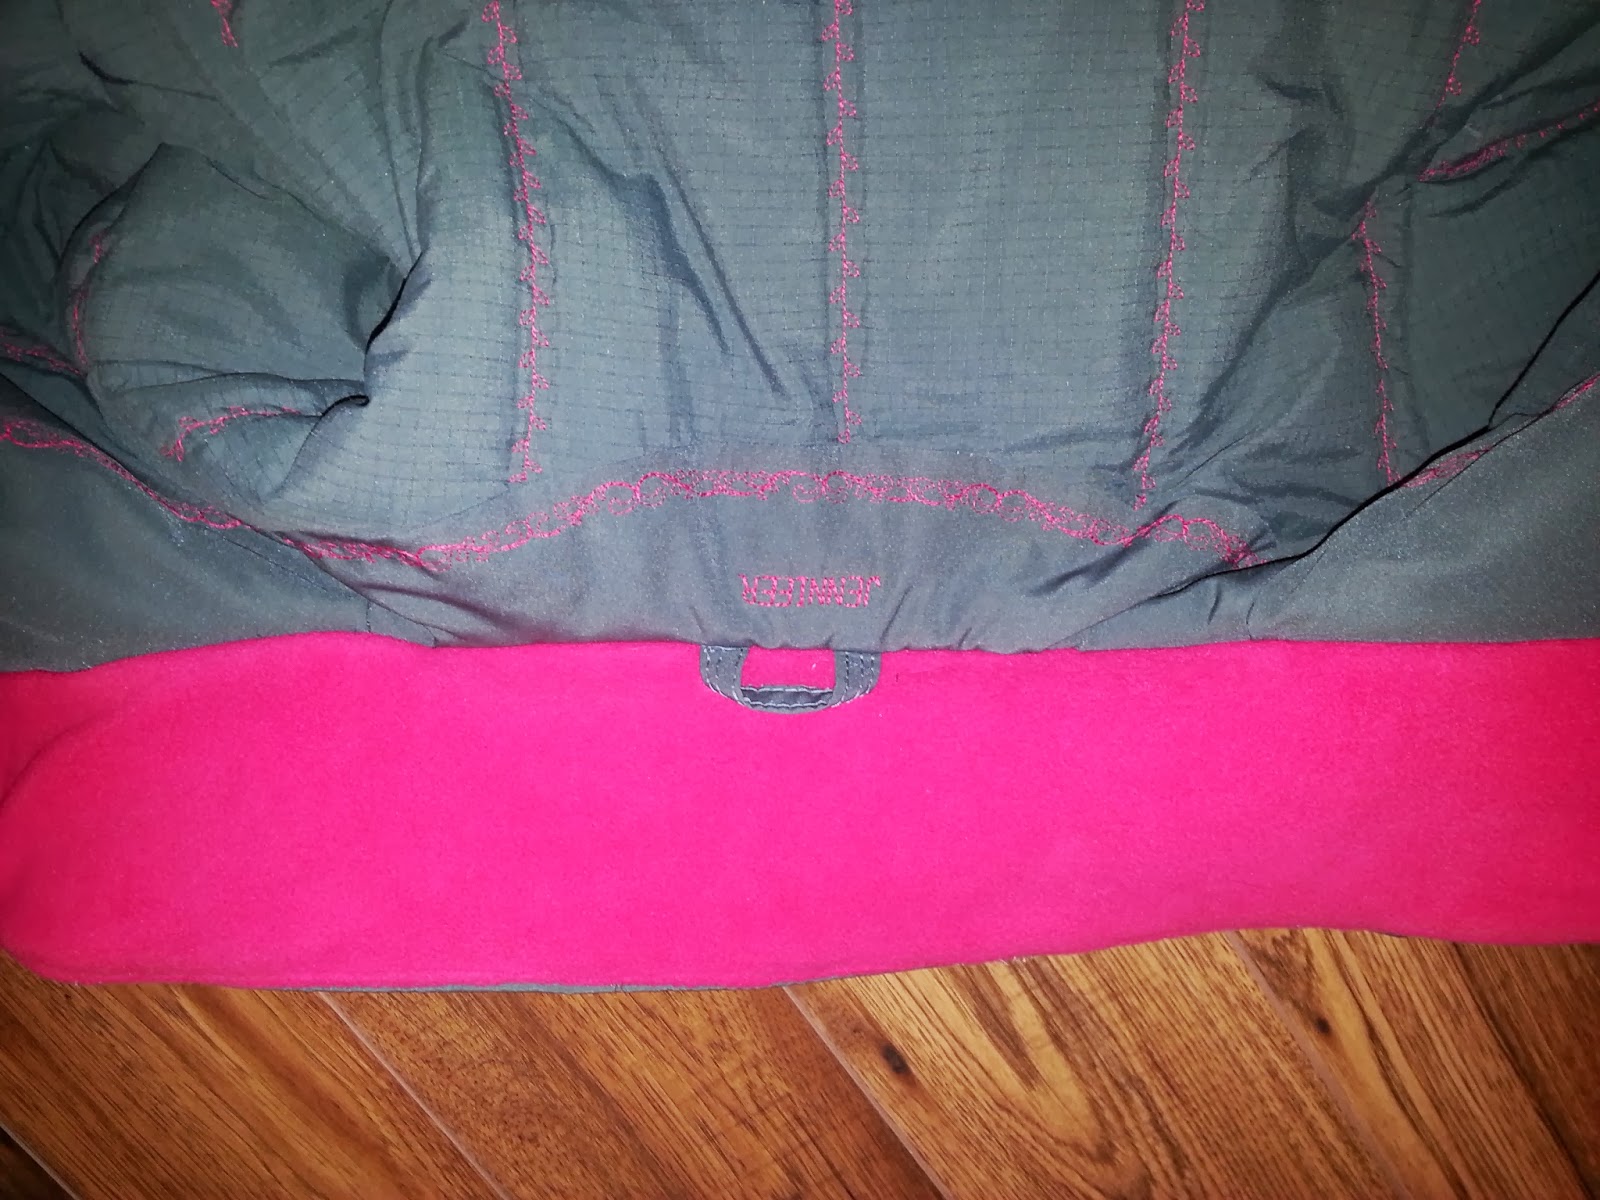 Family Buzz: Jalie 2108 - My winter ski jacket completed!